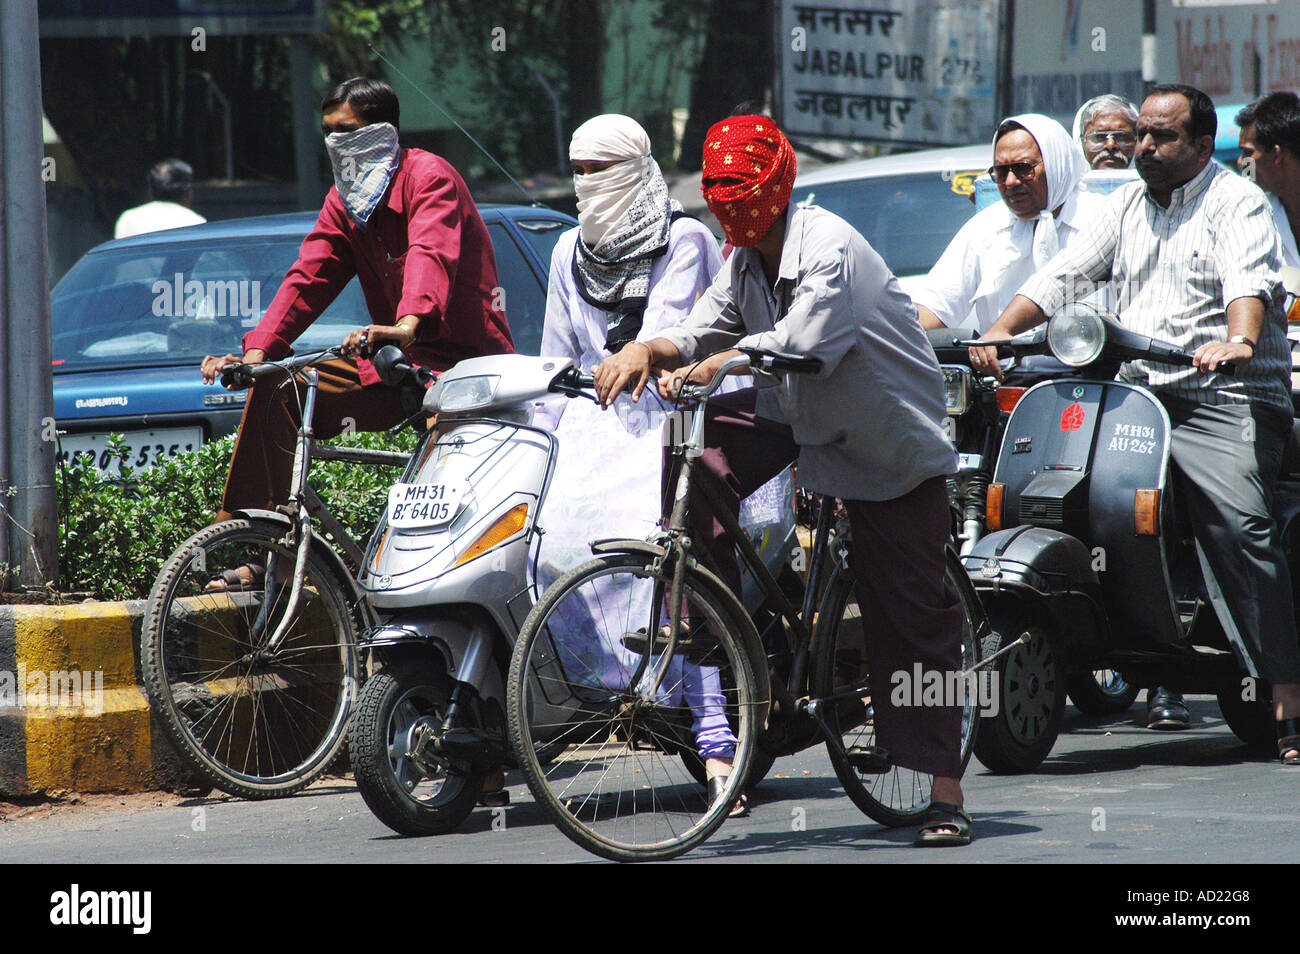 Two wheeler motor bike riders cover their faces with scarfs for safety and protection in summer heat at Nagpur Maharashtra India Stock Photo